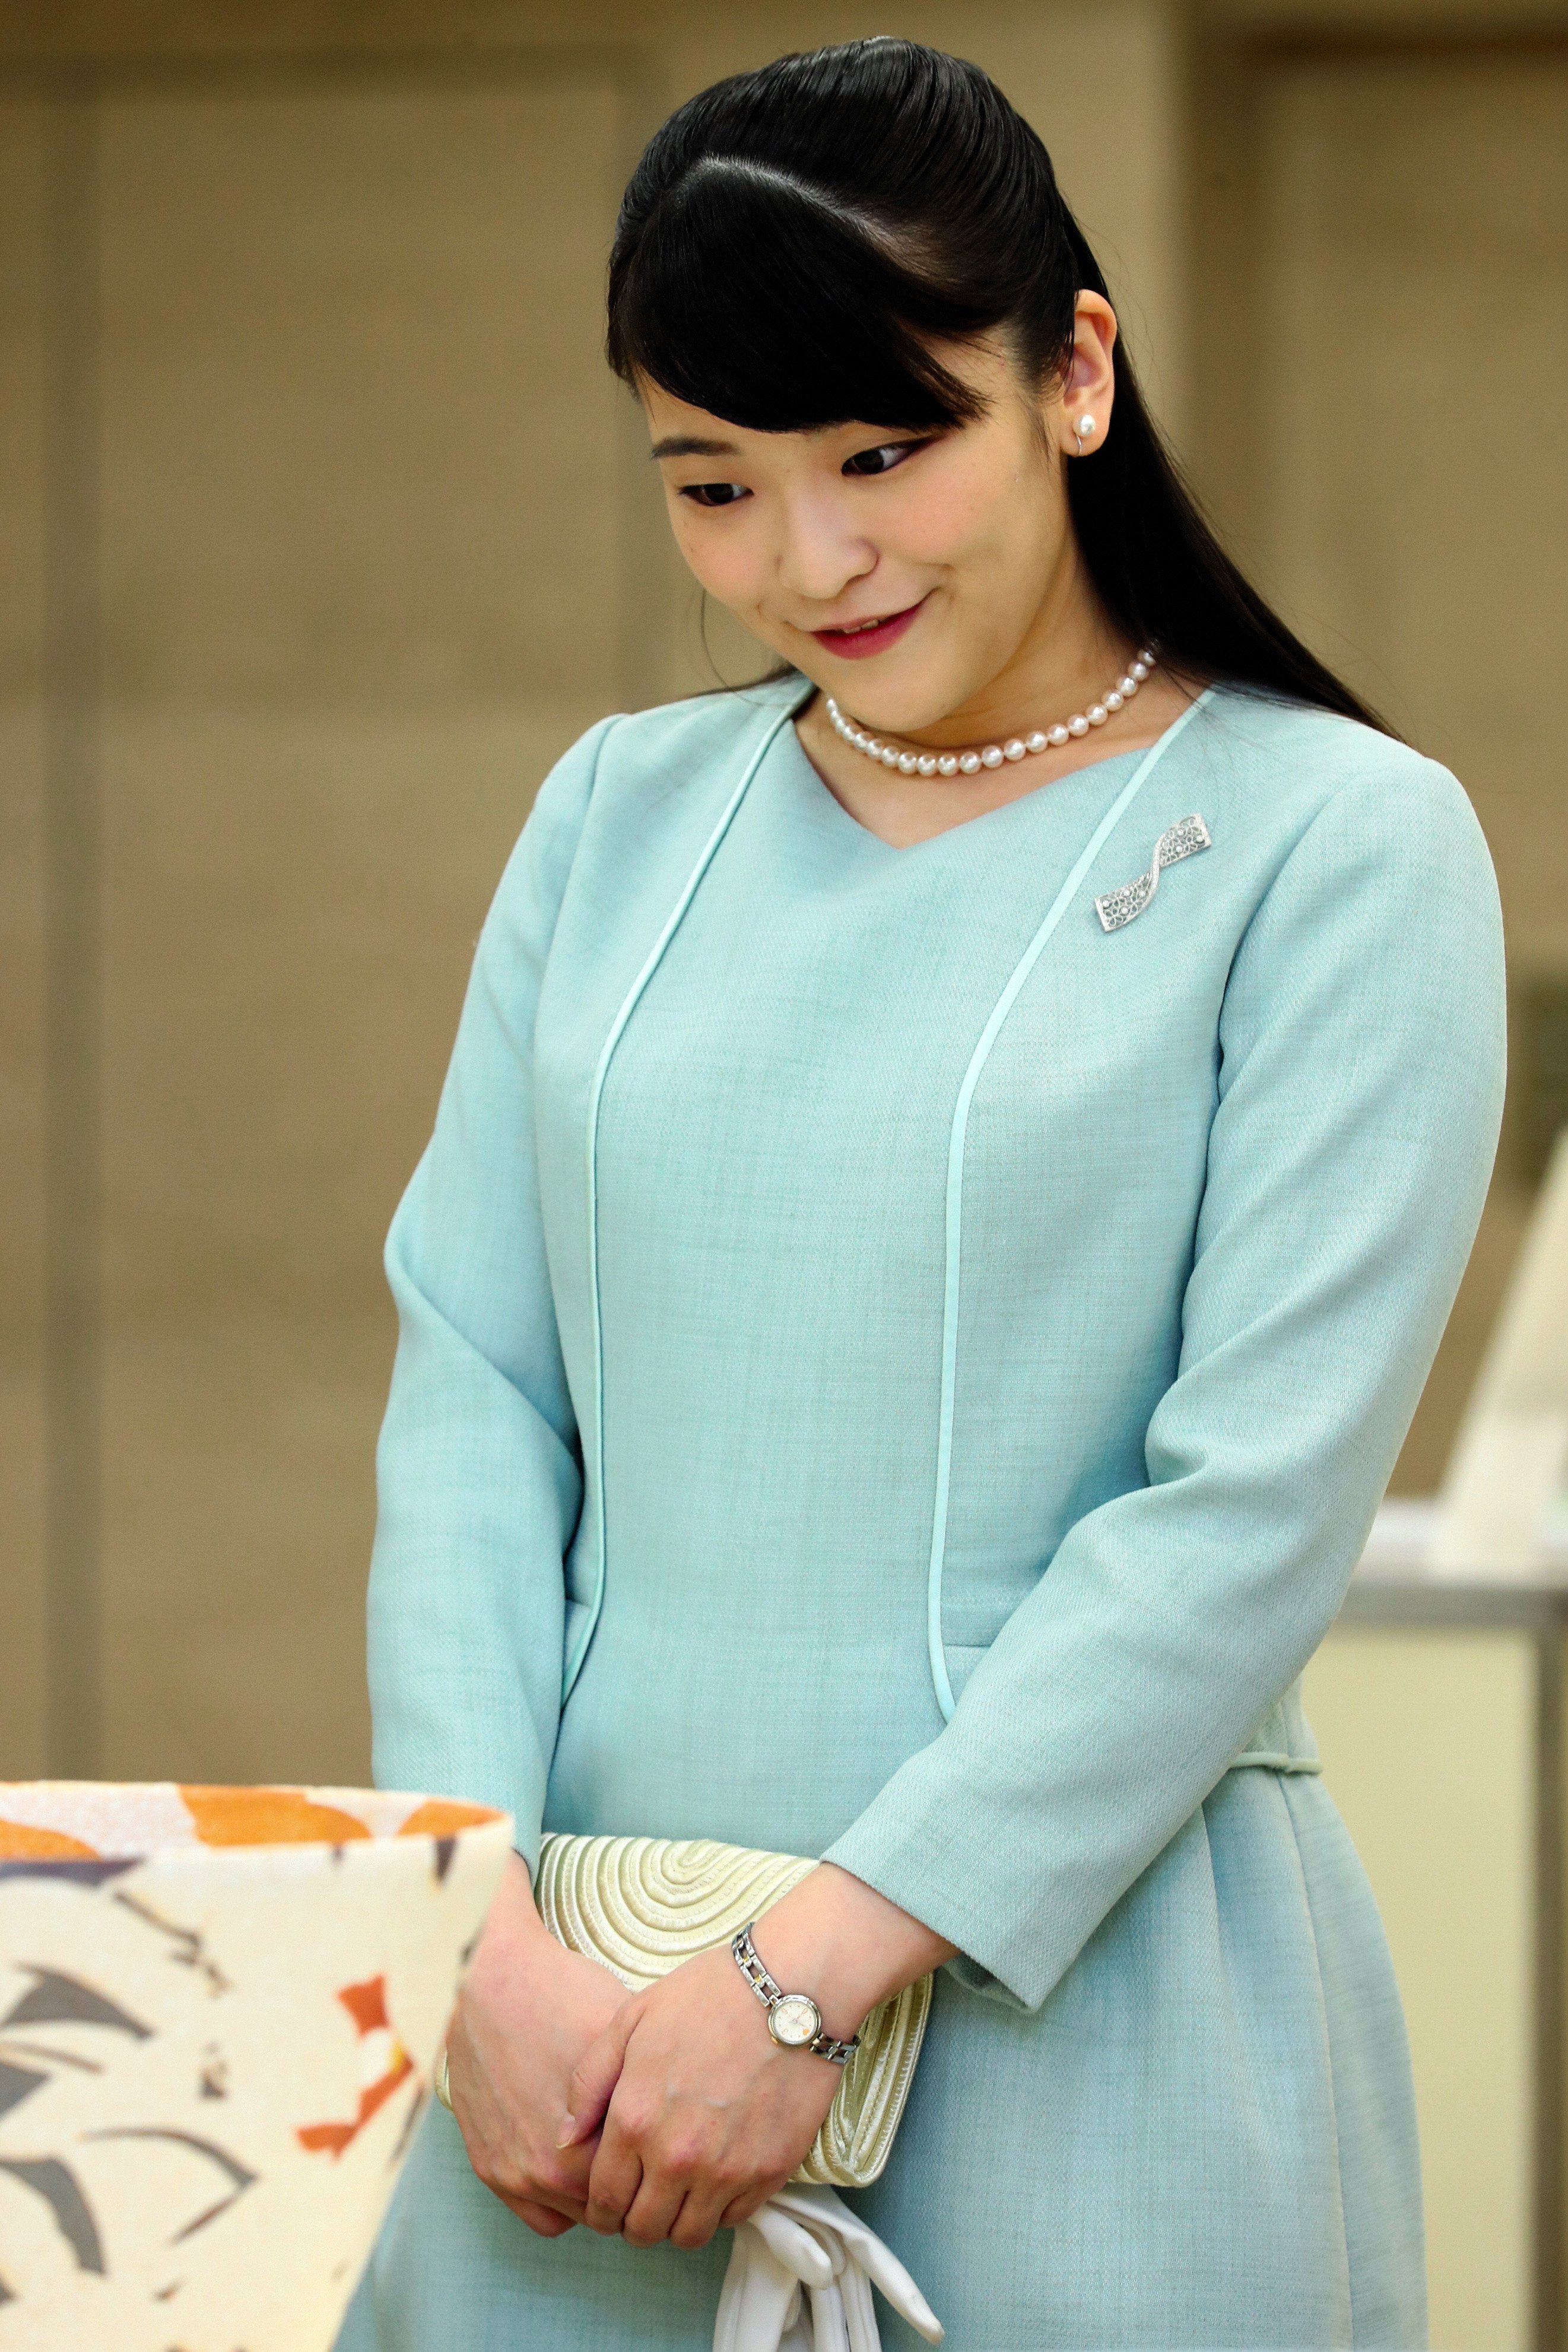 Princess Mako of Akishino attends the Japan Traditional Crafts Award Ceremony on September 20, 2019 in Tokyo, Japan | Source: Getty Images